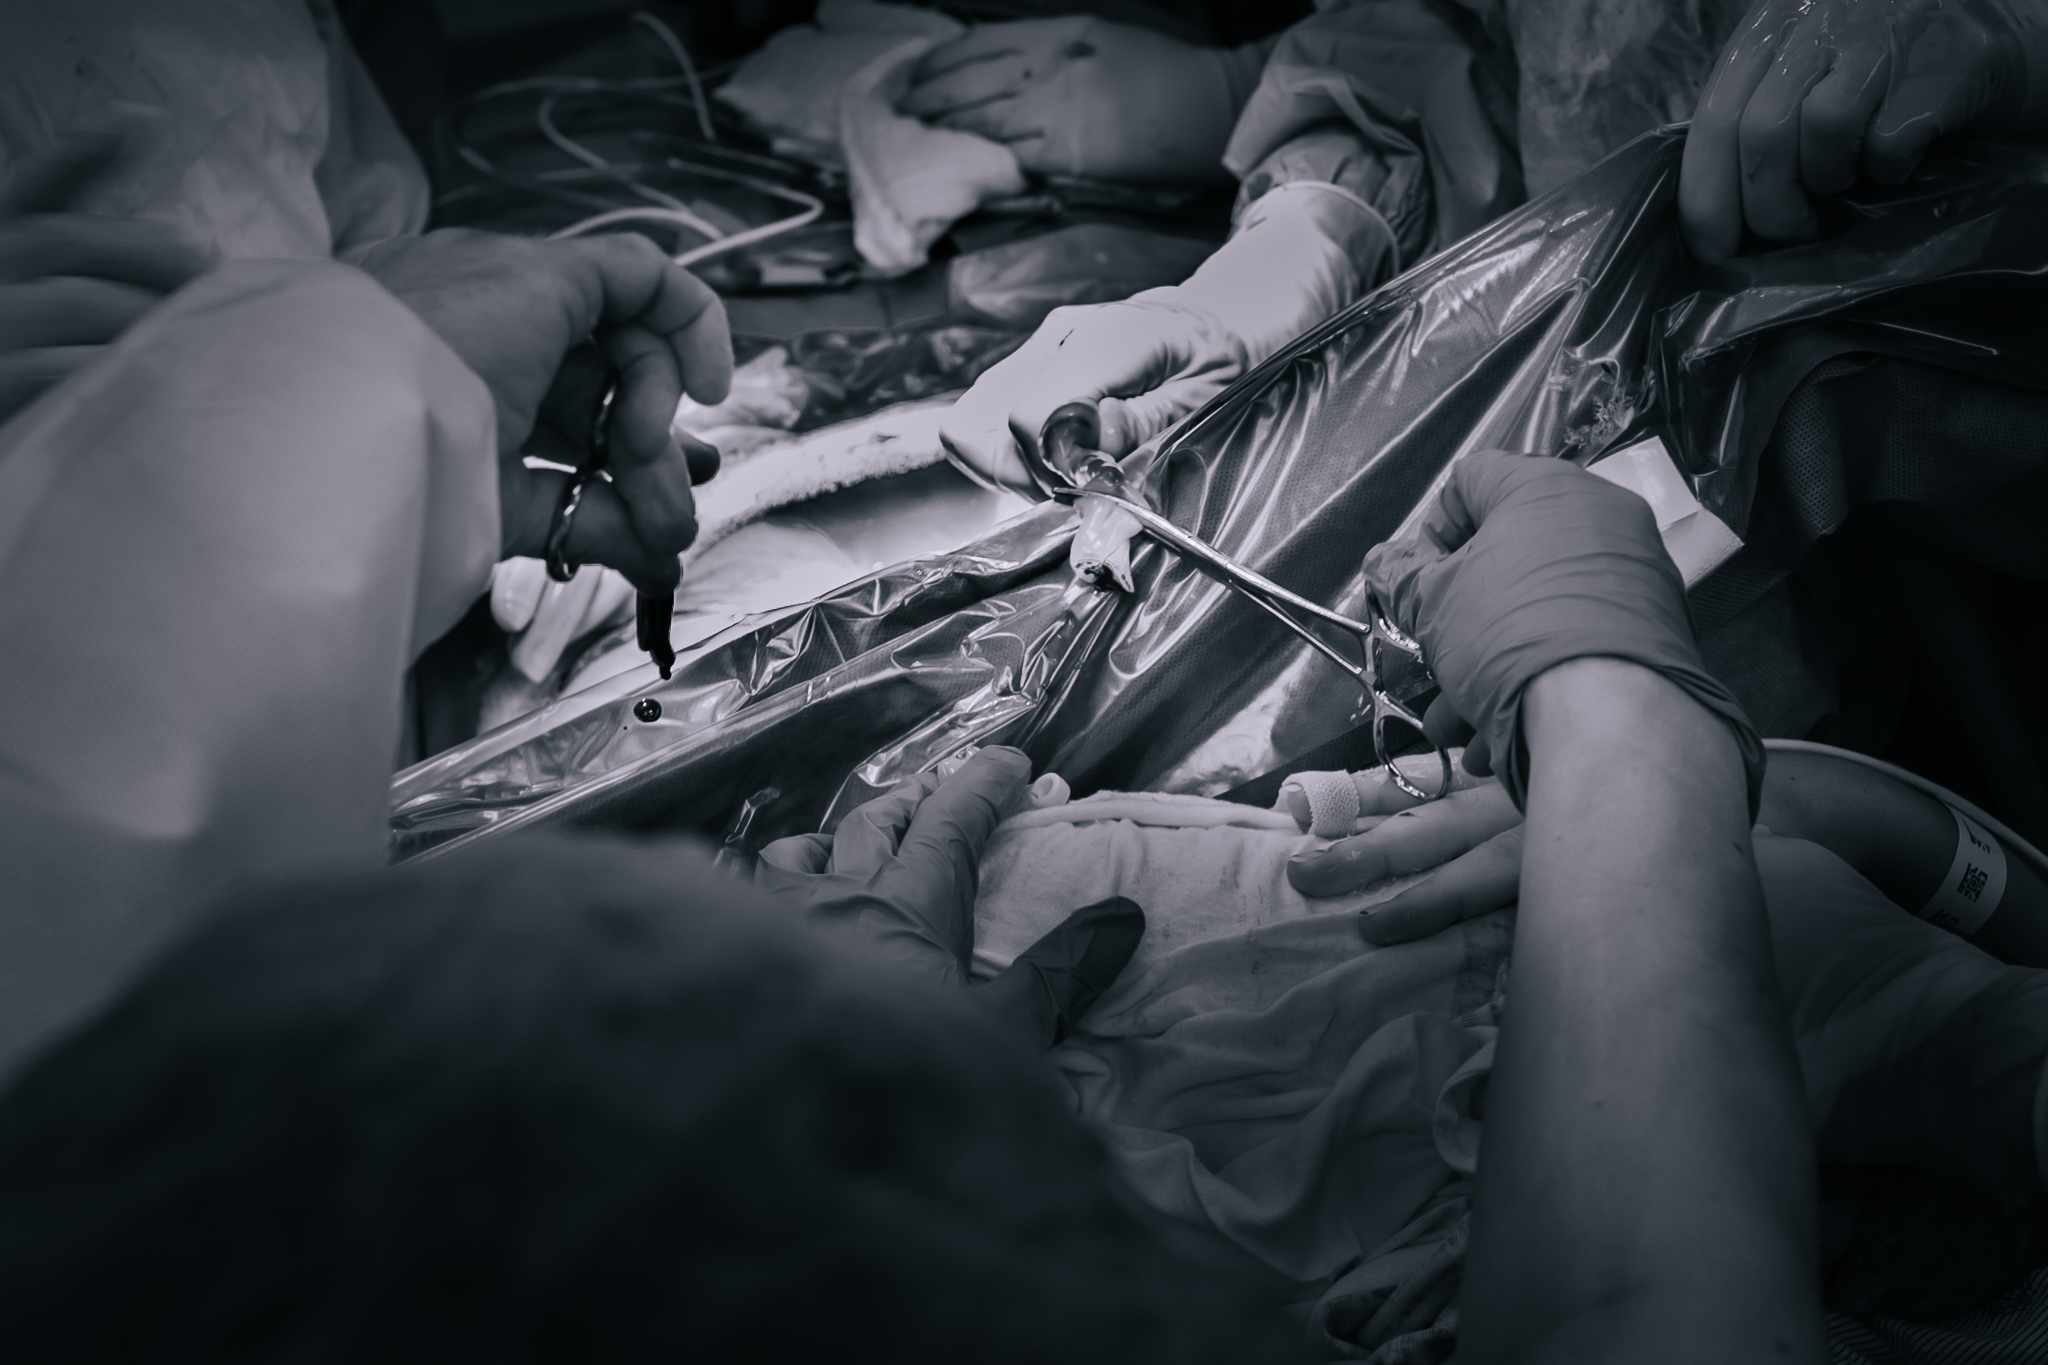 Cutting the umbilical cord in a cesarean section. 